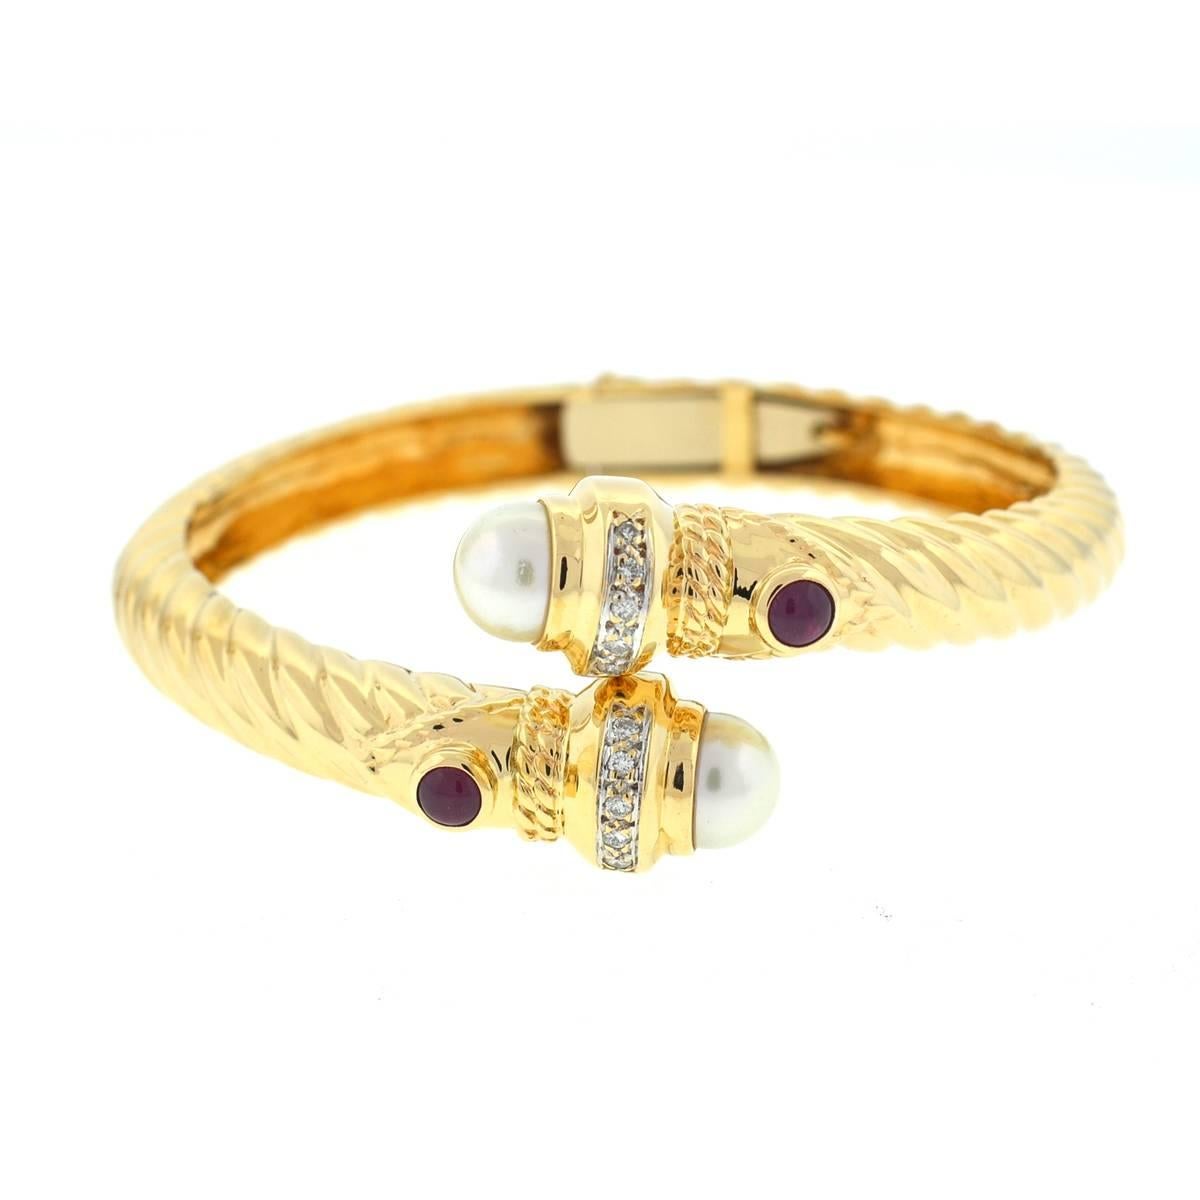 Style - Bangle
Metal - 14k Yellow Gold
Stones - Pearl, Ruby & Diamonds
Weight - 33.9 Grams  - Fits a 6.5